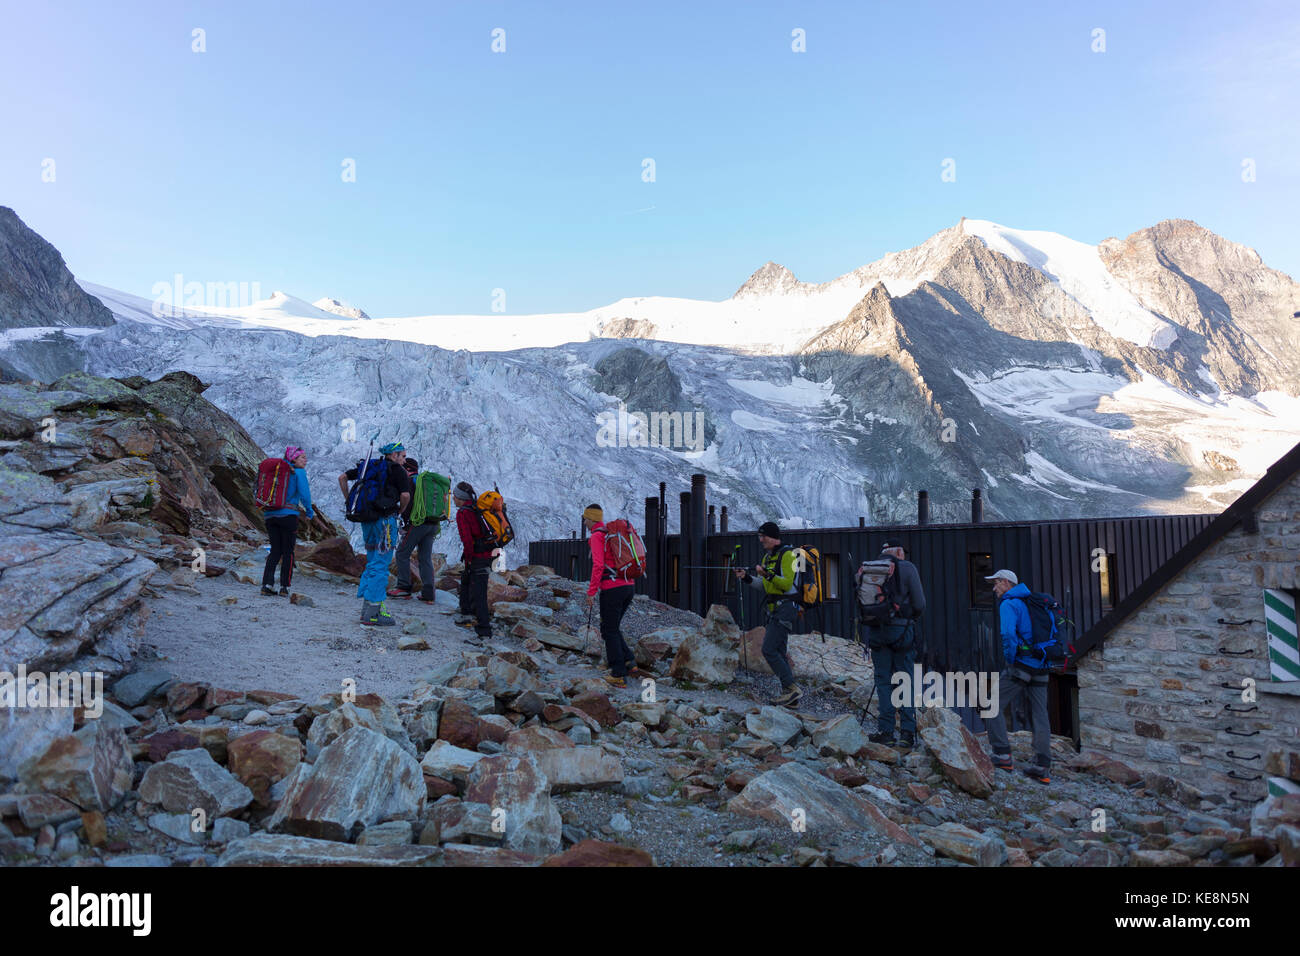 MOIRY VALLEY, SWITZERLAND - Climbers departing Cabane de Moiry, mountain hut, Moiry glacier, in the Pennine Alps in the canton of Valais. Stock Photo